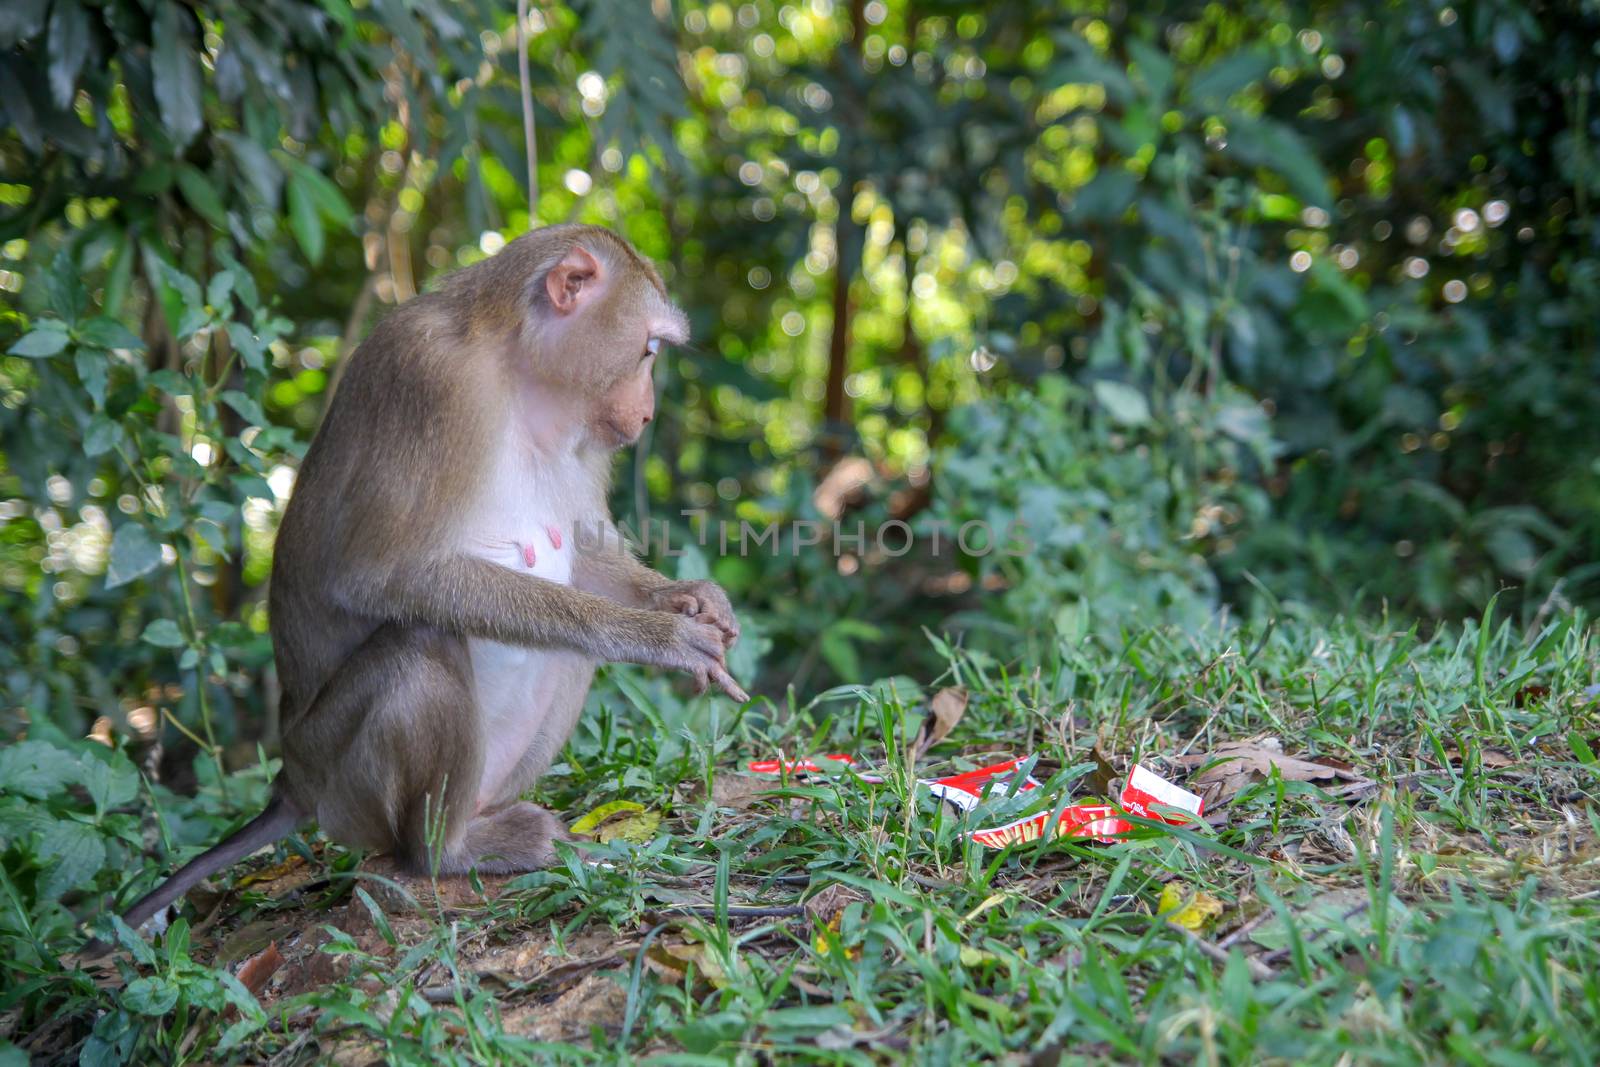 Monkey sitdown and look Garbage in side forest